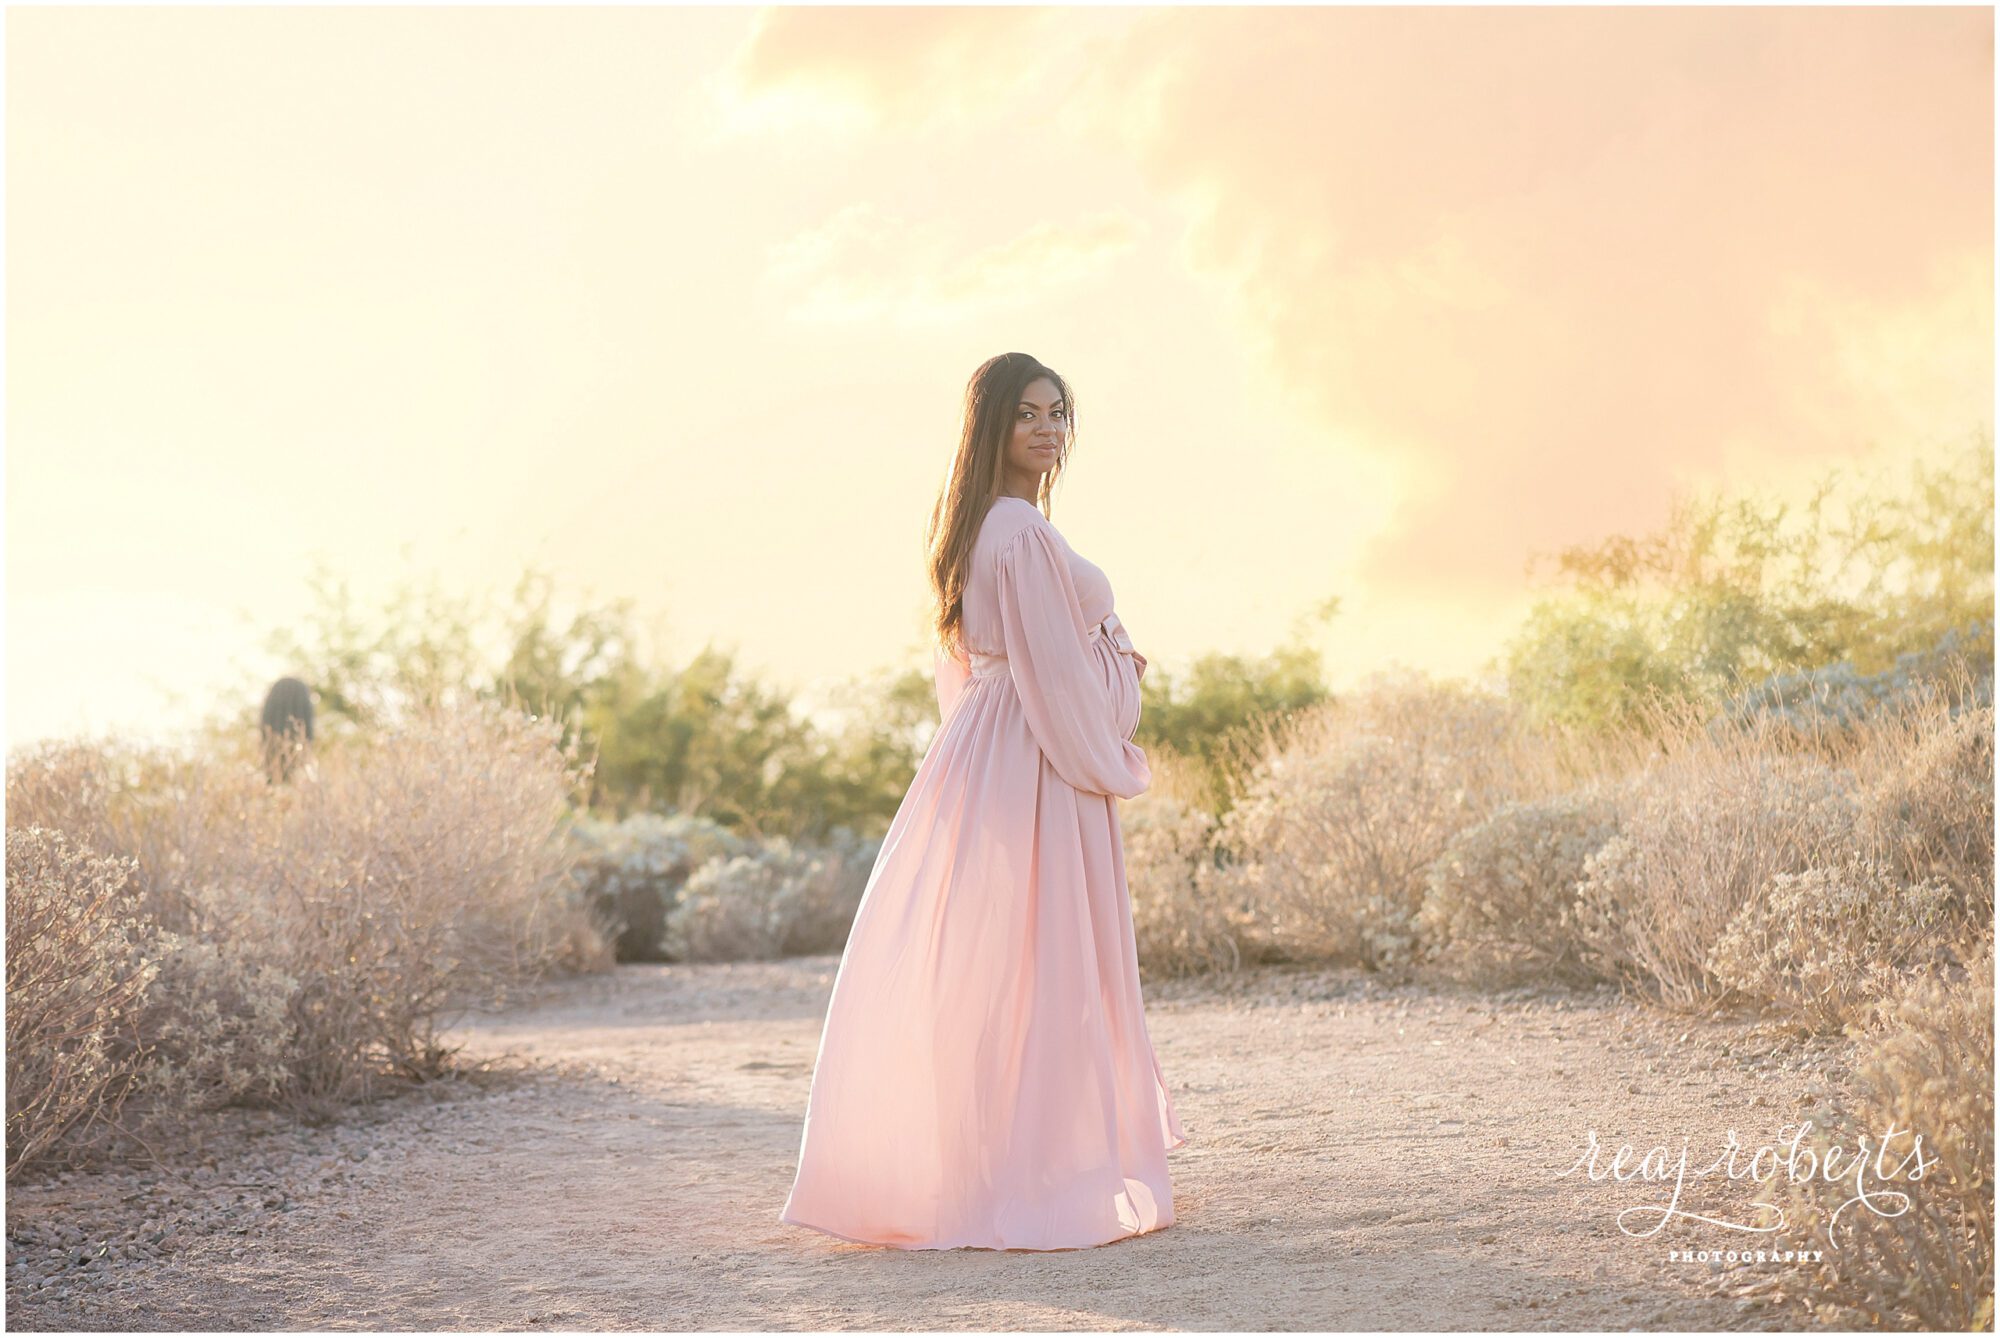 Maternity clothes for photo shoot | Reaj Roberts Photography